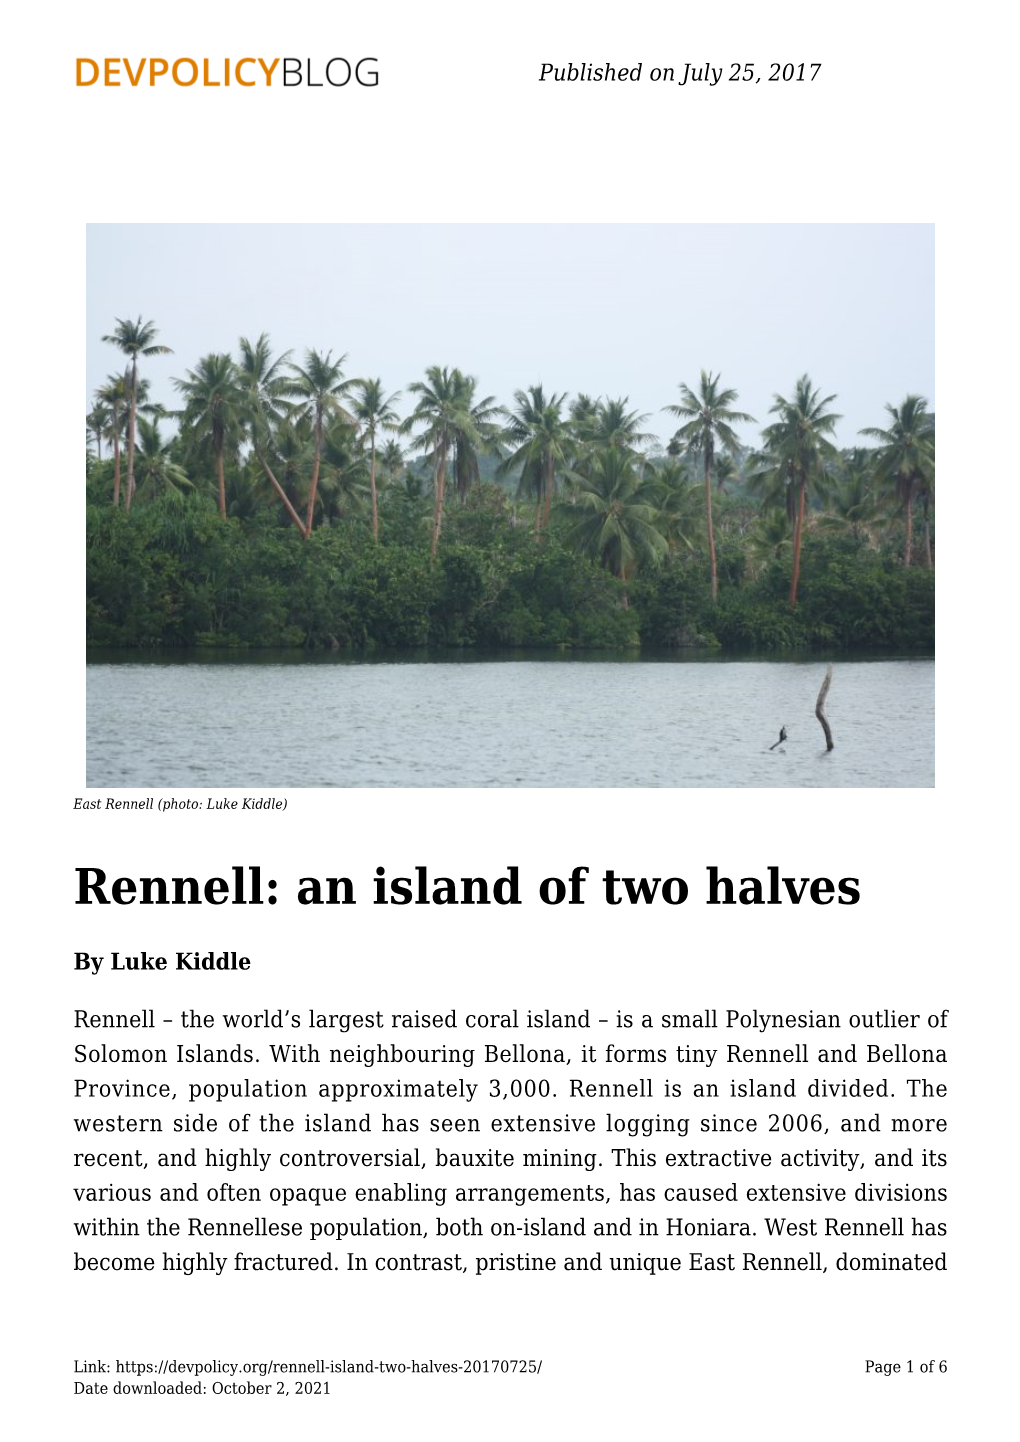 Rennell: an Island of Two Halves